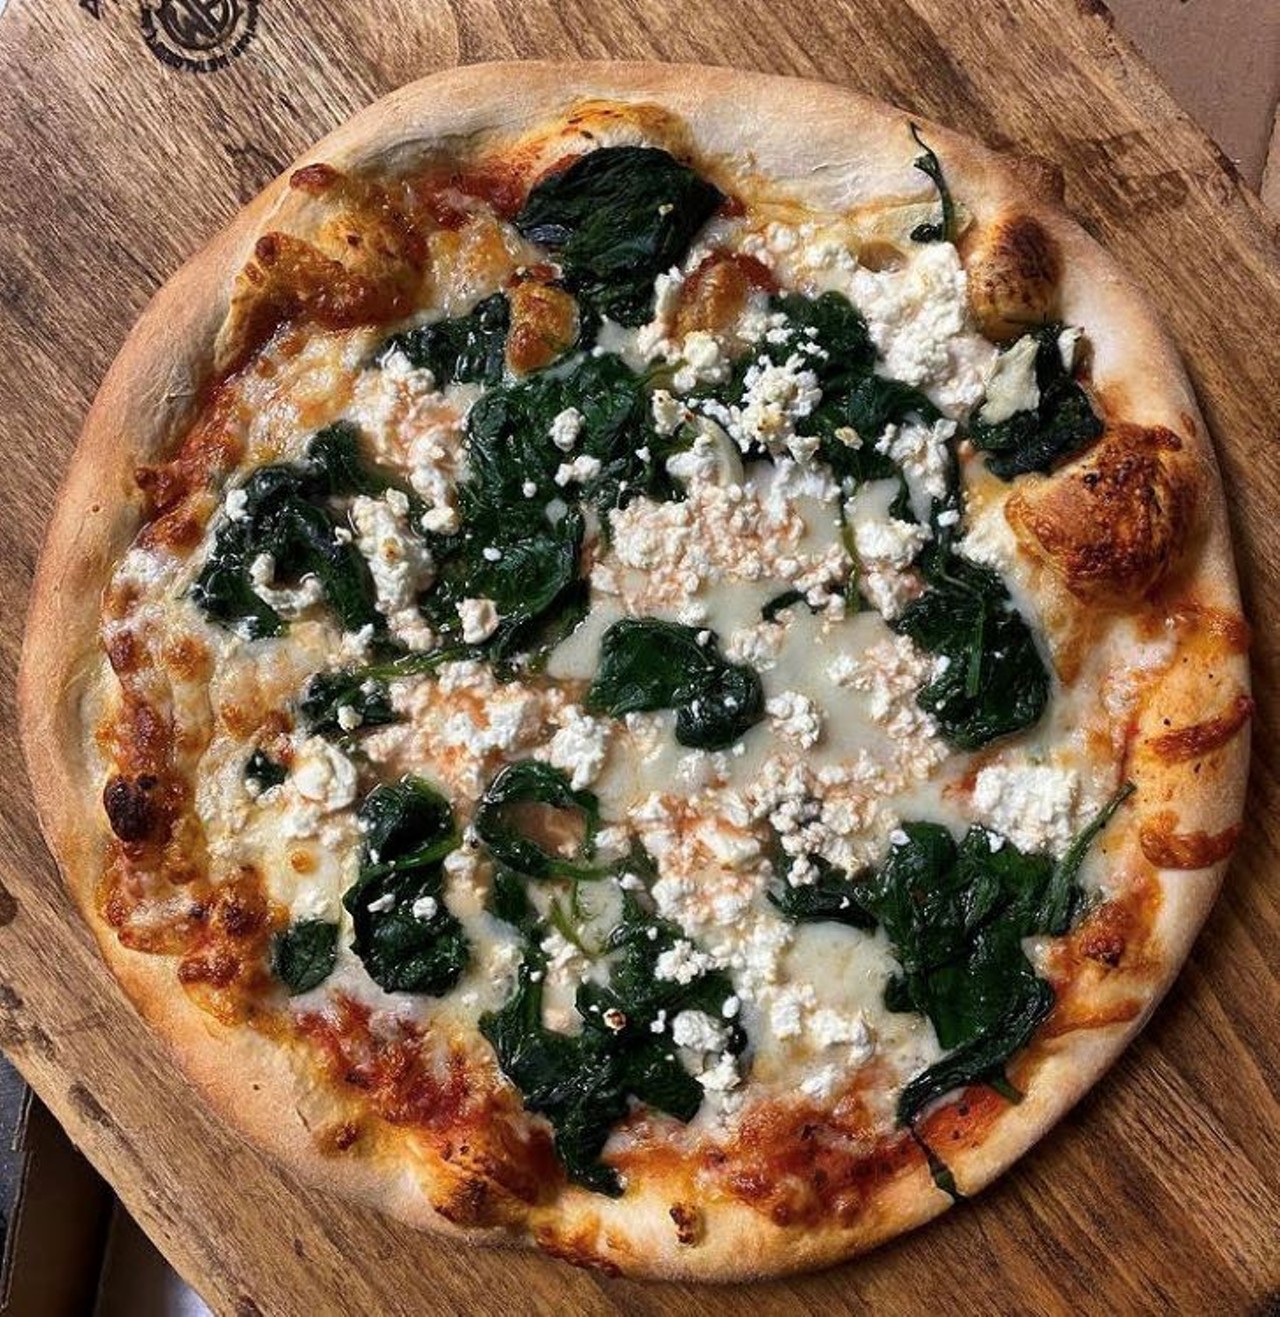 Pizzeria Del-Dio 
3210 E. Colonial Drive
Before moving to Florida in 1994, Pizzeria Del-Dio was servicing the Brooklyn, New York area for over 20 years. Check out their award-winning pizza and casual dining atmosphere. 
Photo via Pizzeria Del-Dio/Instagram